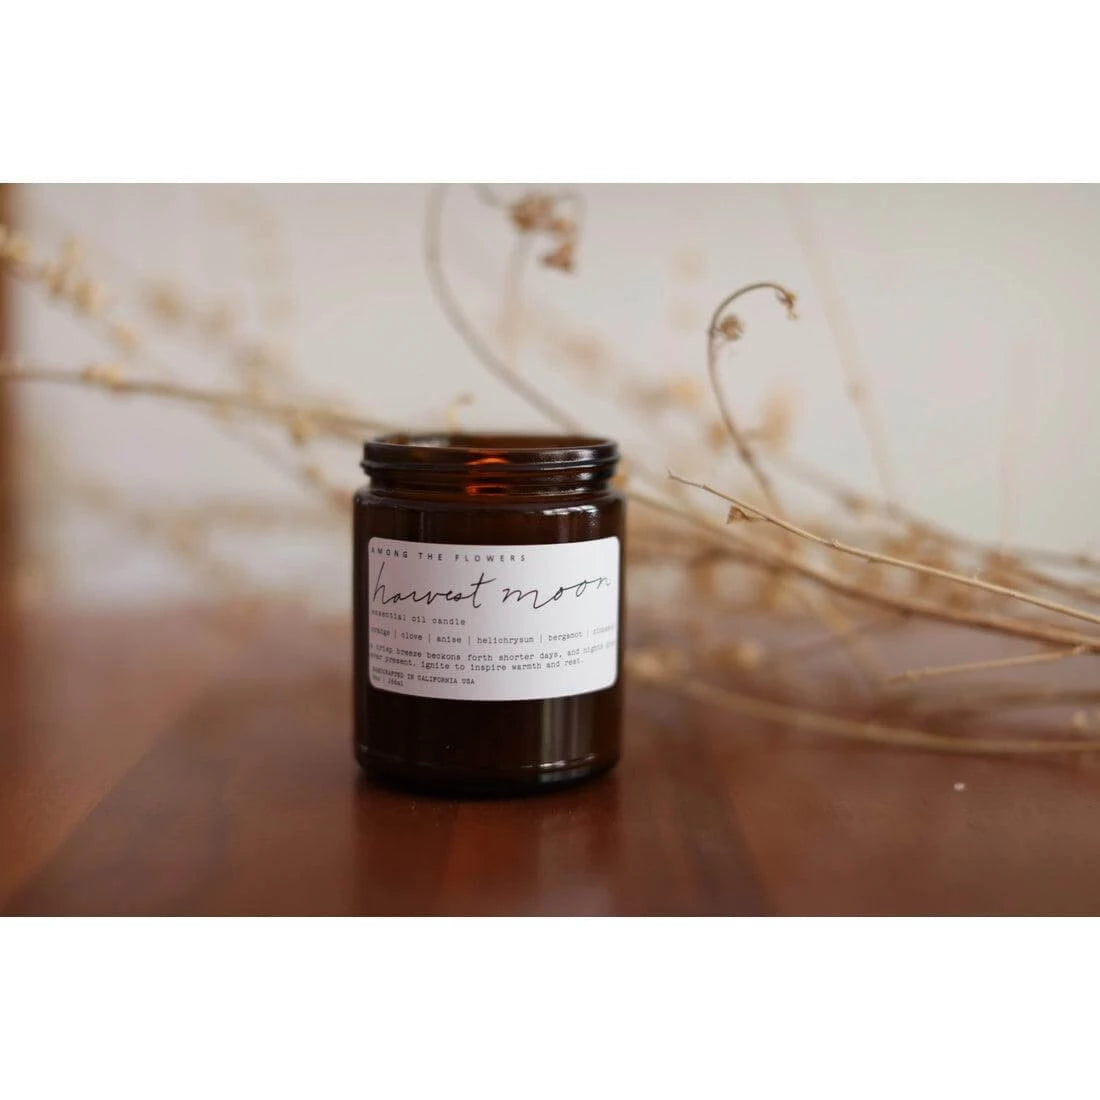 Among the Flowers Candles - Sprig Flower Co